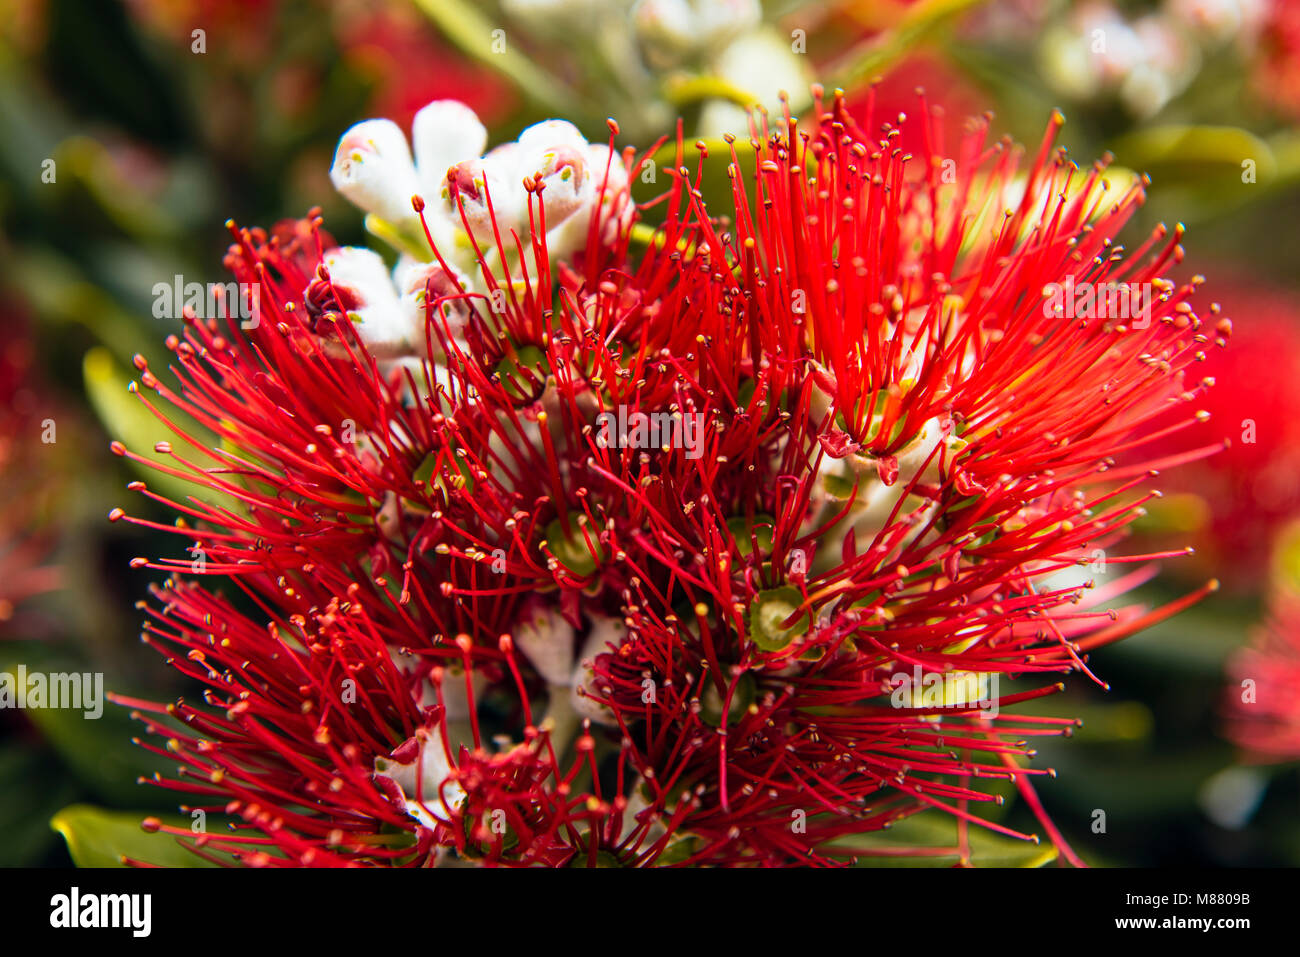 Detail of bloom of Crimson Pohutukawa (Metrosideros excelsa) tree, also known as New Zealand's Christmas Tree. Stock Photo